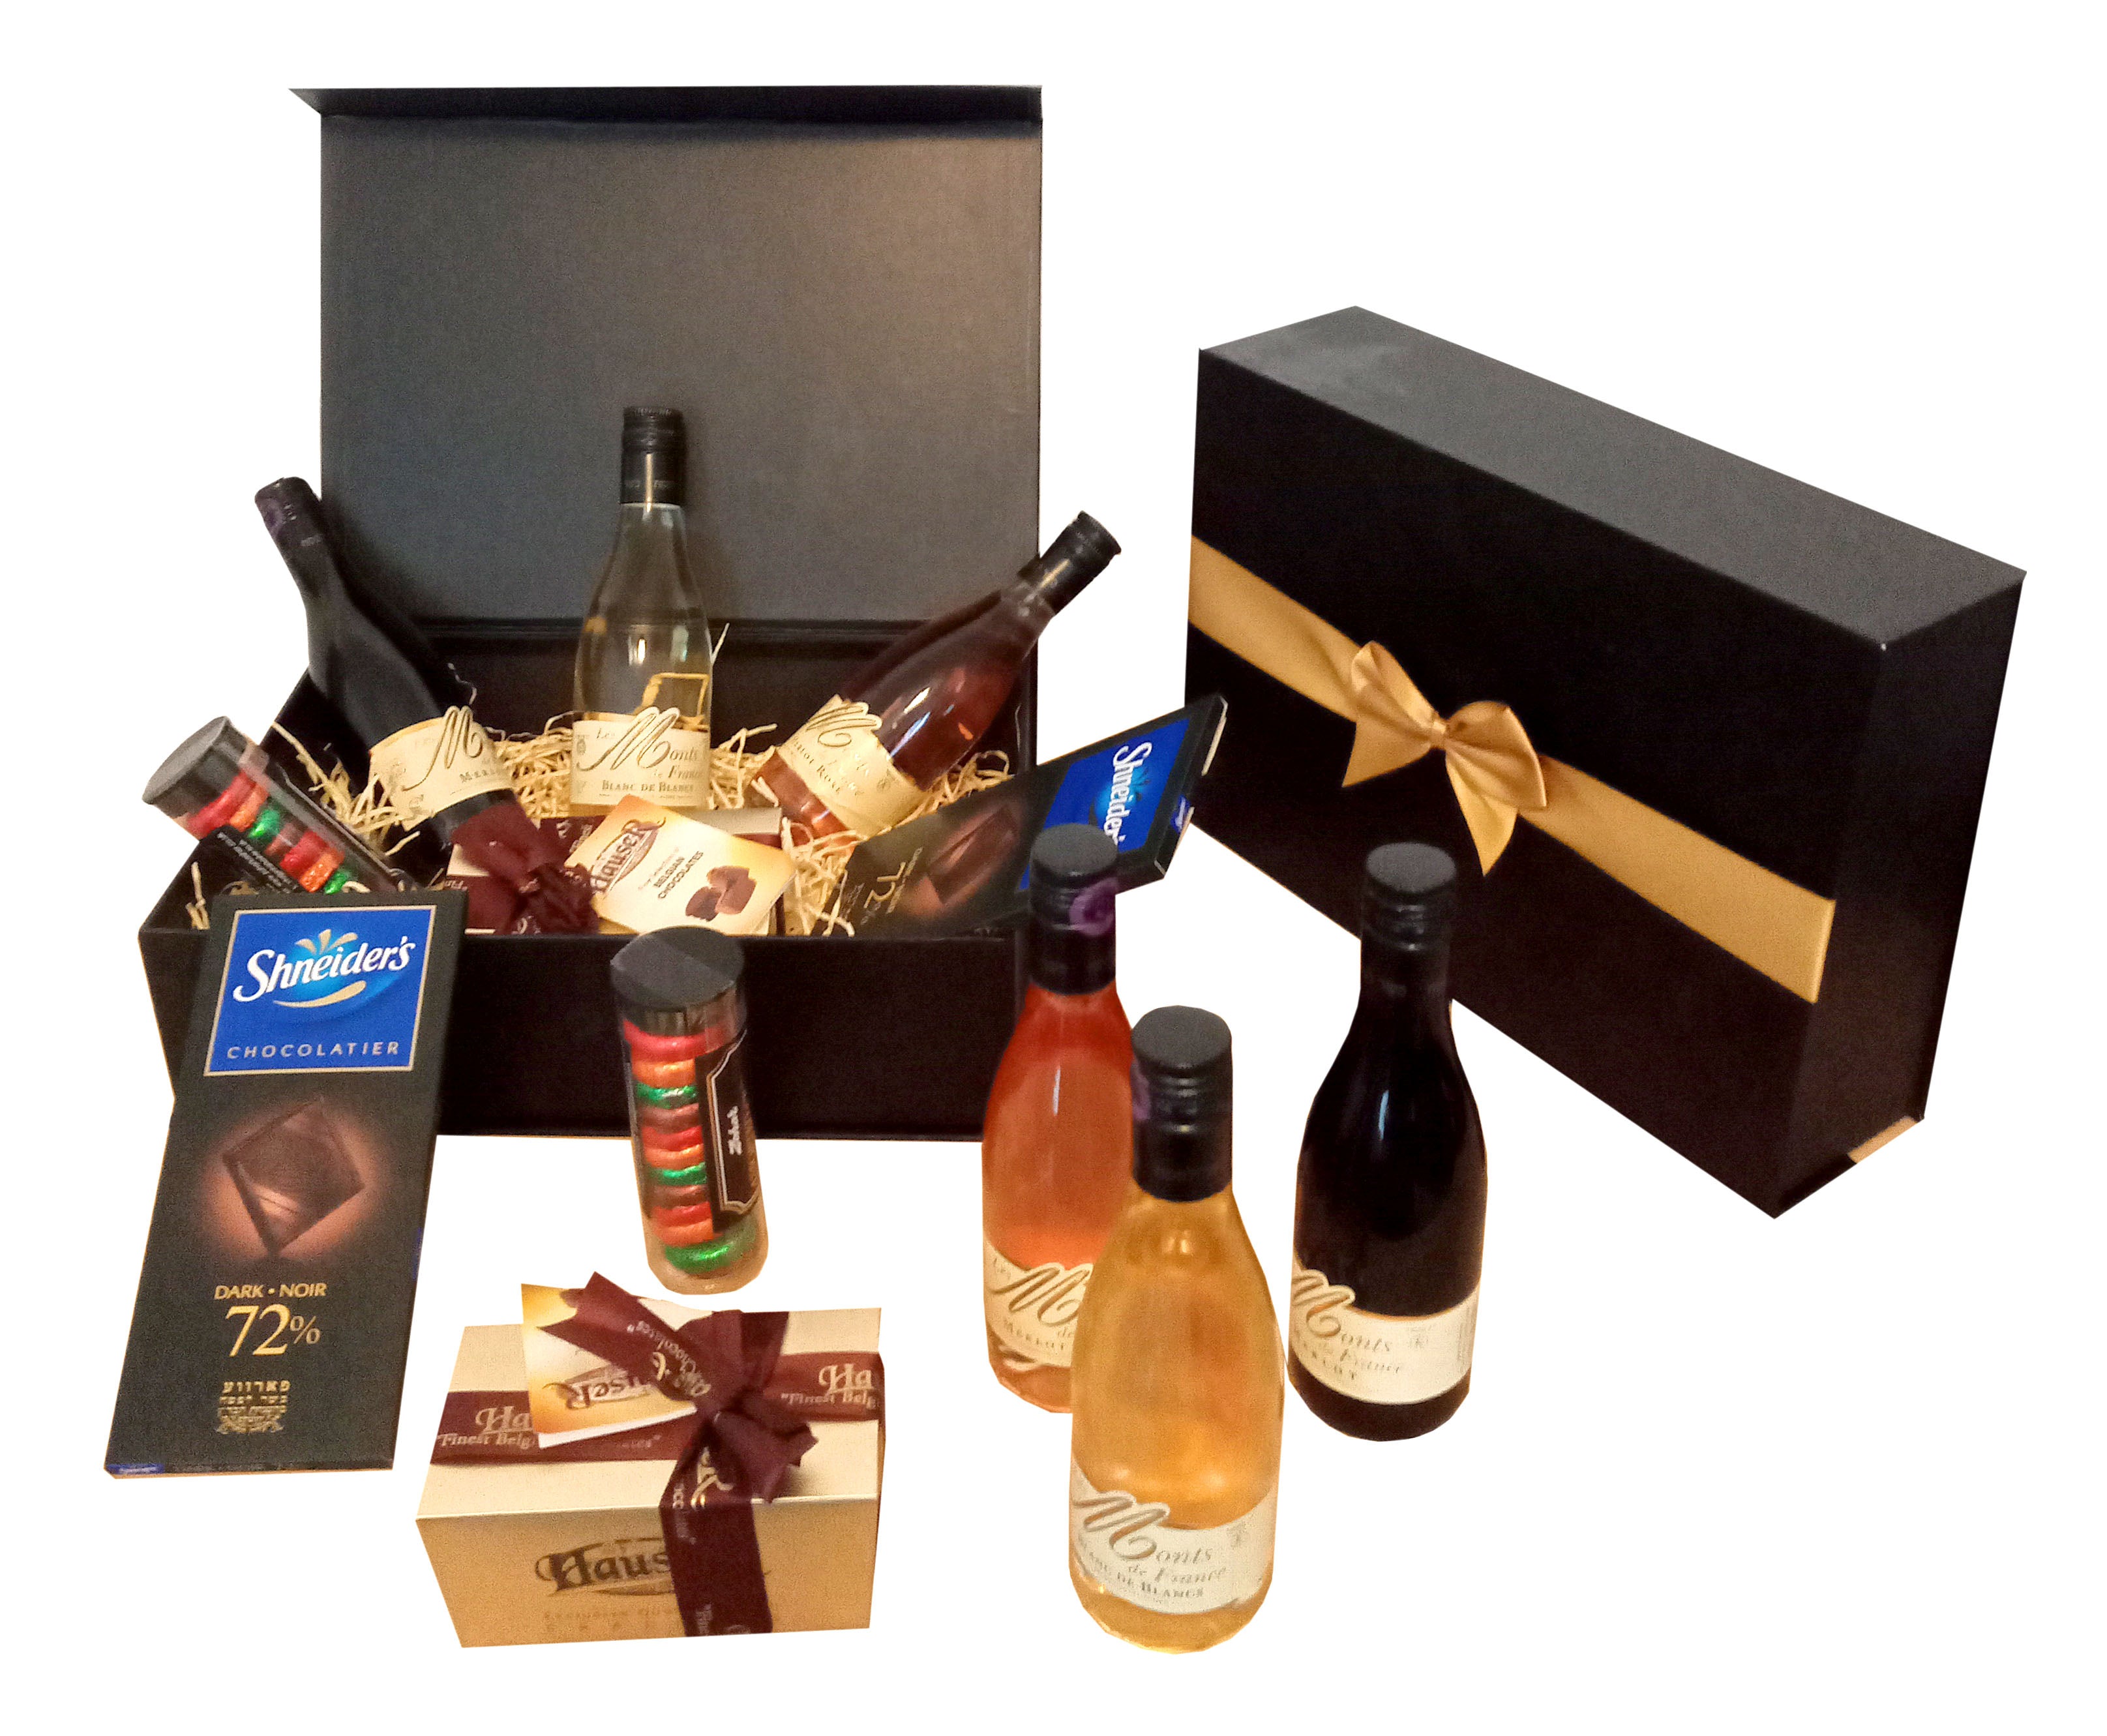 Kosher Wine And Chocolate Gift For Any Occasion. Corporate Gift. French Wines, Symphony Chocolates, Zohar Cremes And 72% Cocoa Bar In A Reusable Magnetic Closing Gift Box. Gift Wrapped And Delivered To London, Manchester & Throughout The UK